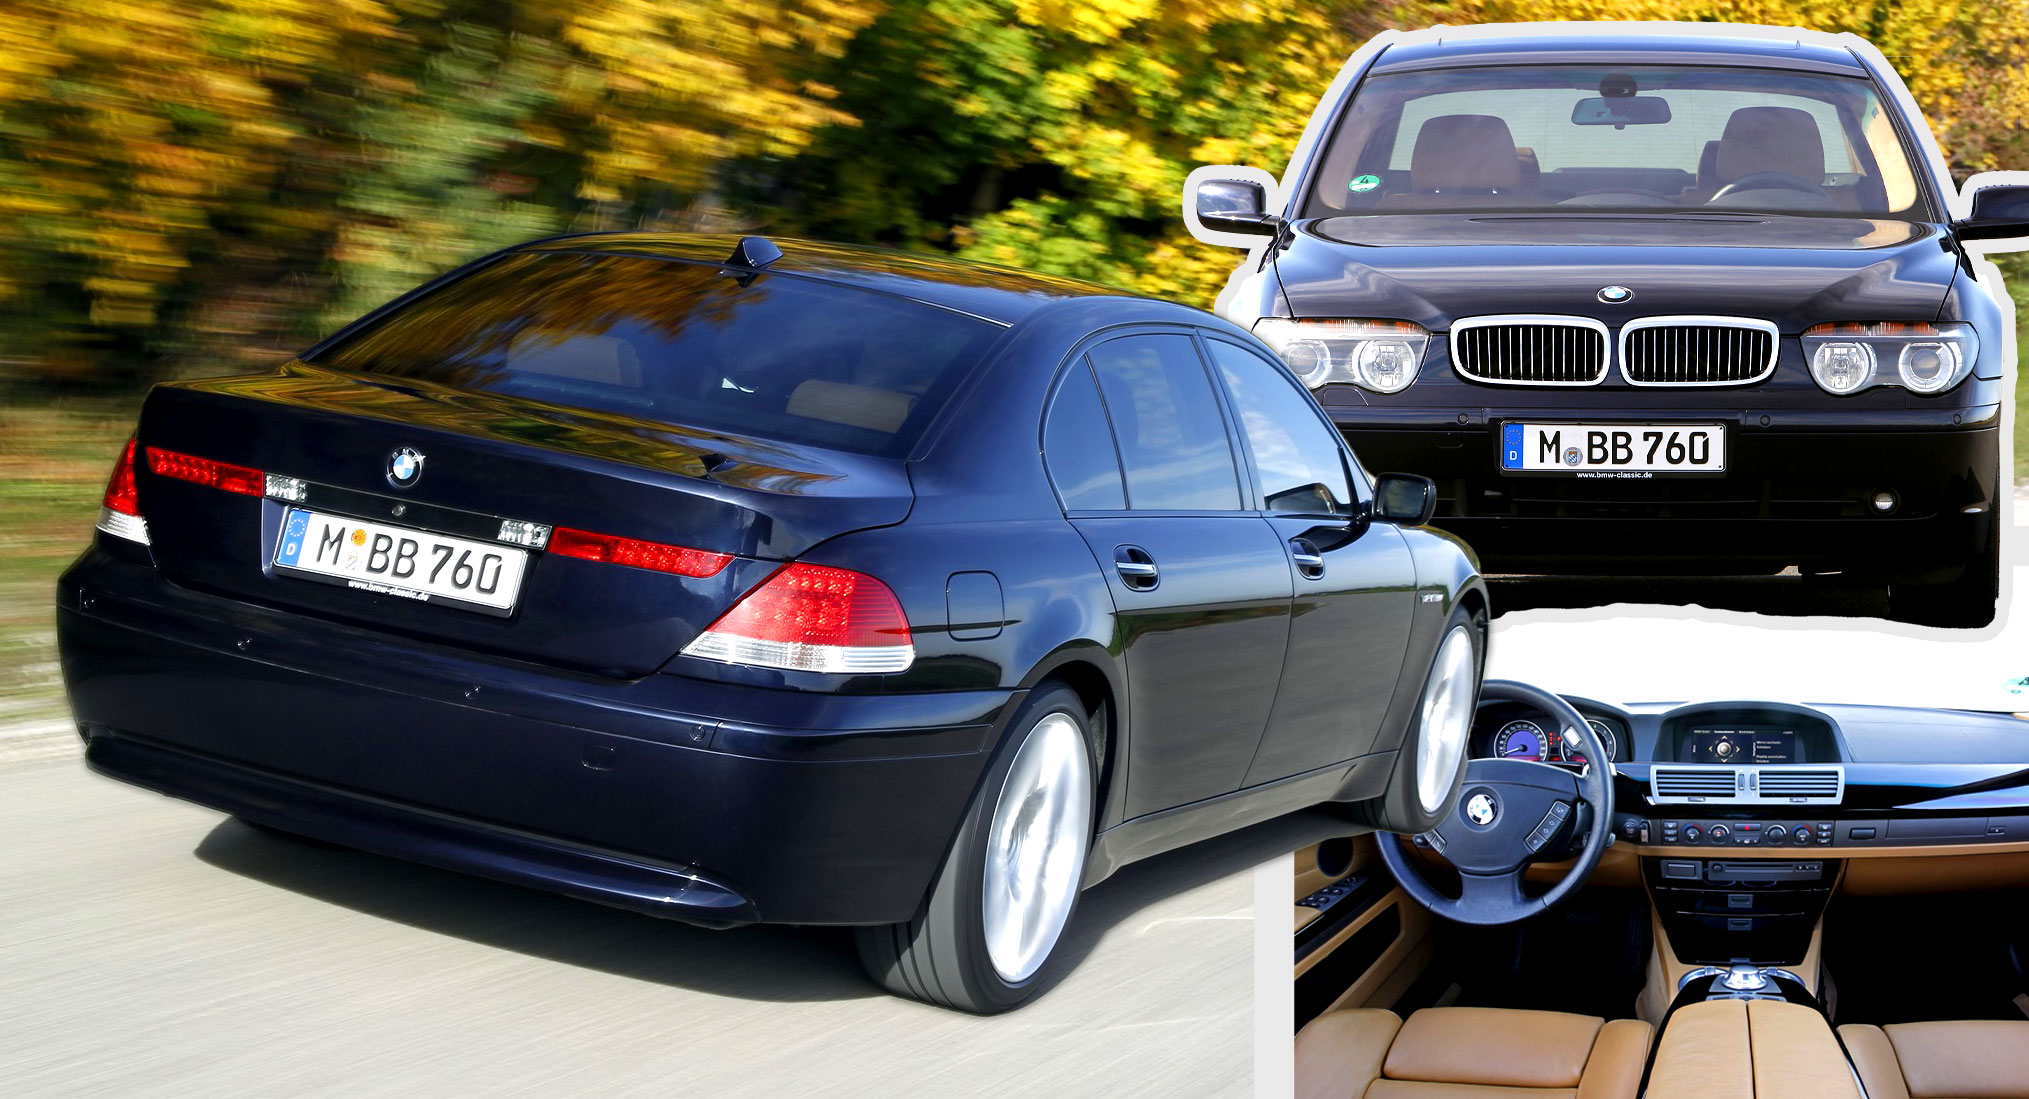 The E60 BMW 5 Series' Design Was Way Ahead of Its Time and I'm